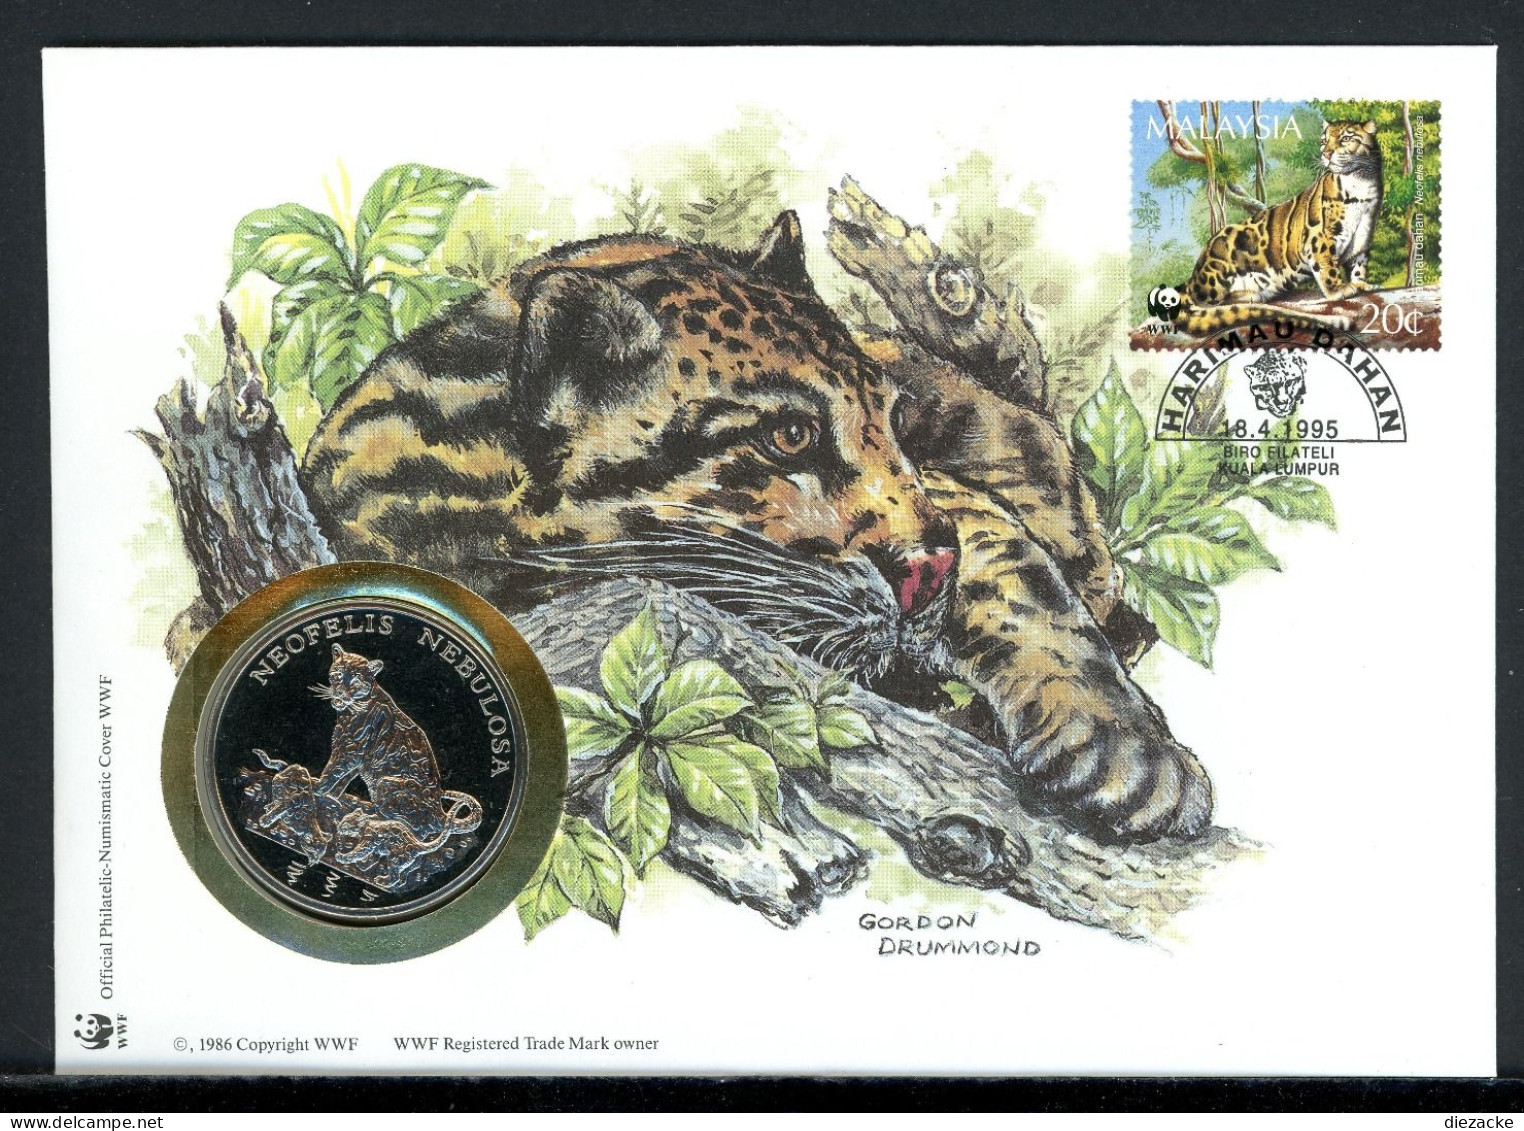 Malaysia 1995 Numisbrief Medaille Nebelparder 30 Jahre WWF, CuNi PP (MD844 - Unclassified